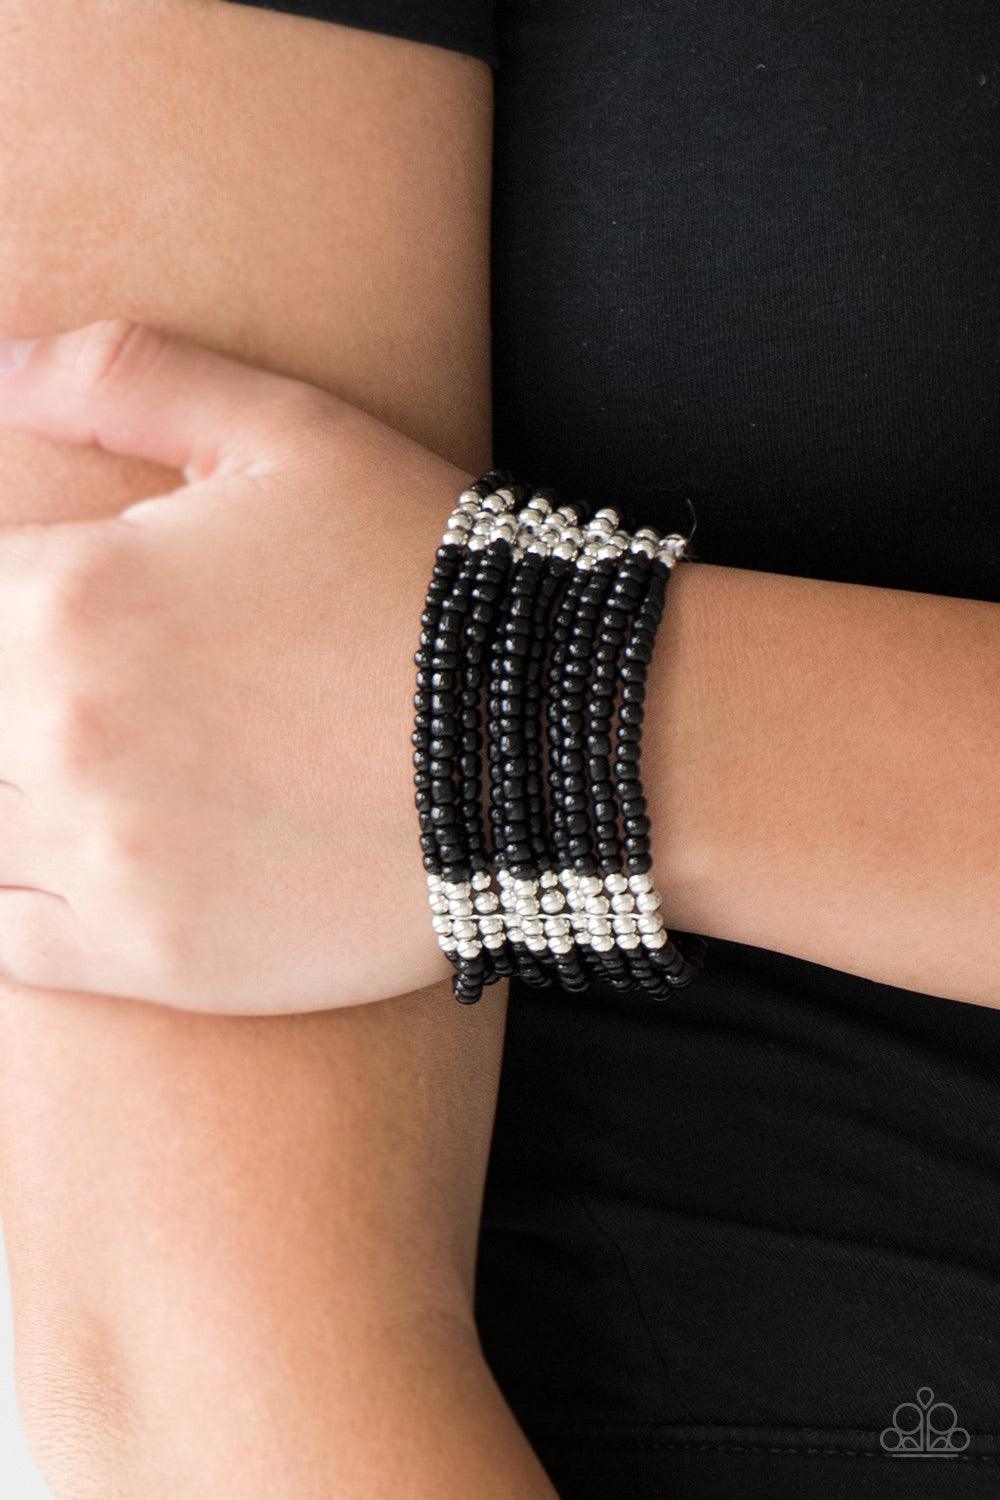 Paparazzi Accessories Outback Odyssey - Black Joined together with metallic fittings, countless black seed beads are threaded along stretchy elastic bands. Sections of dainty silver beads are sprinkled along the colorful layers, adding hints of shimmer to